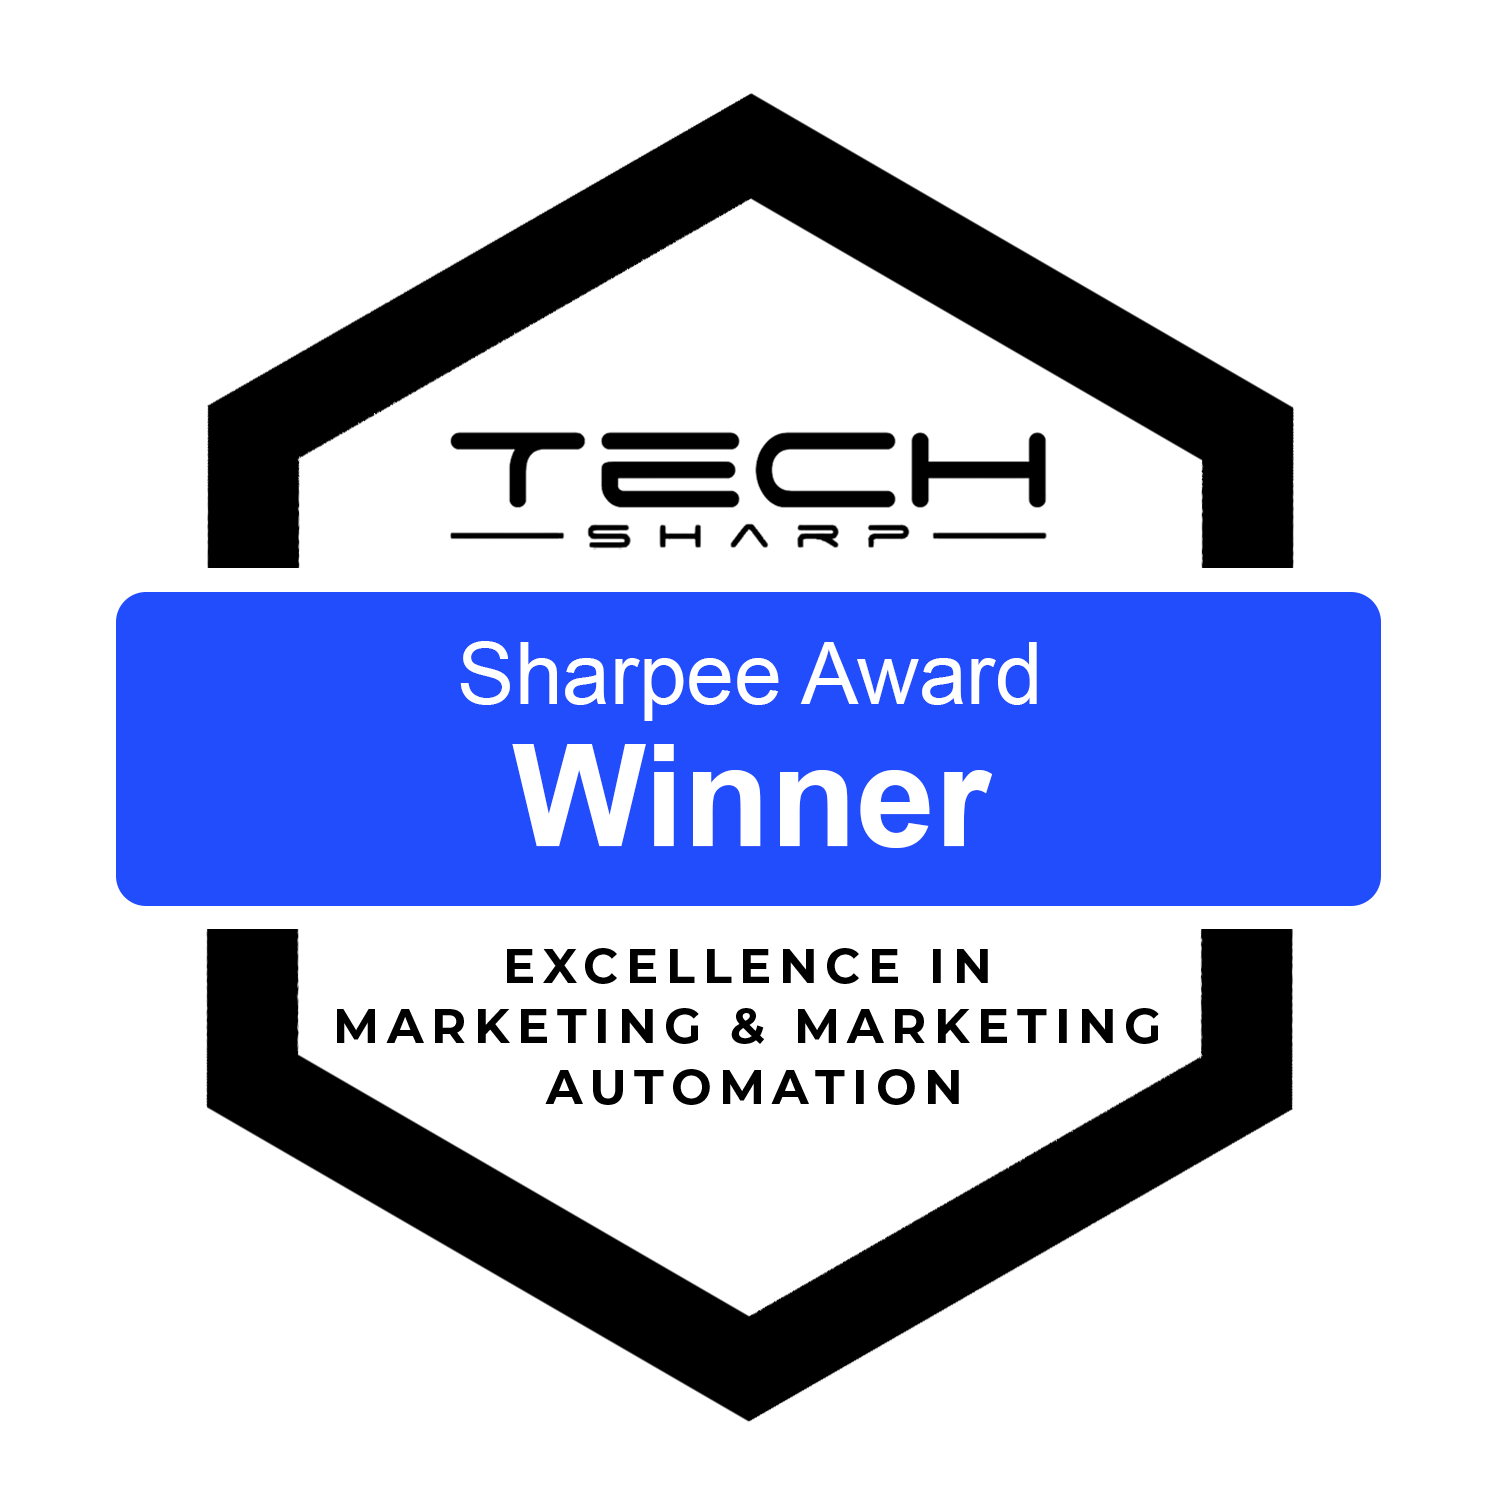 New York, United States 营销公司 Cleverman Inc. 获得了 Sharpee Award for Excellence in Business Process Automation & Marketing 奖项